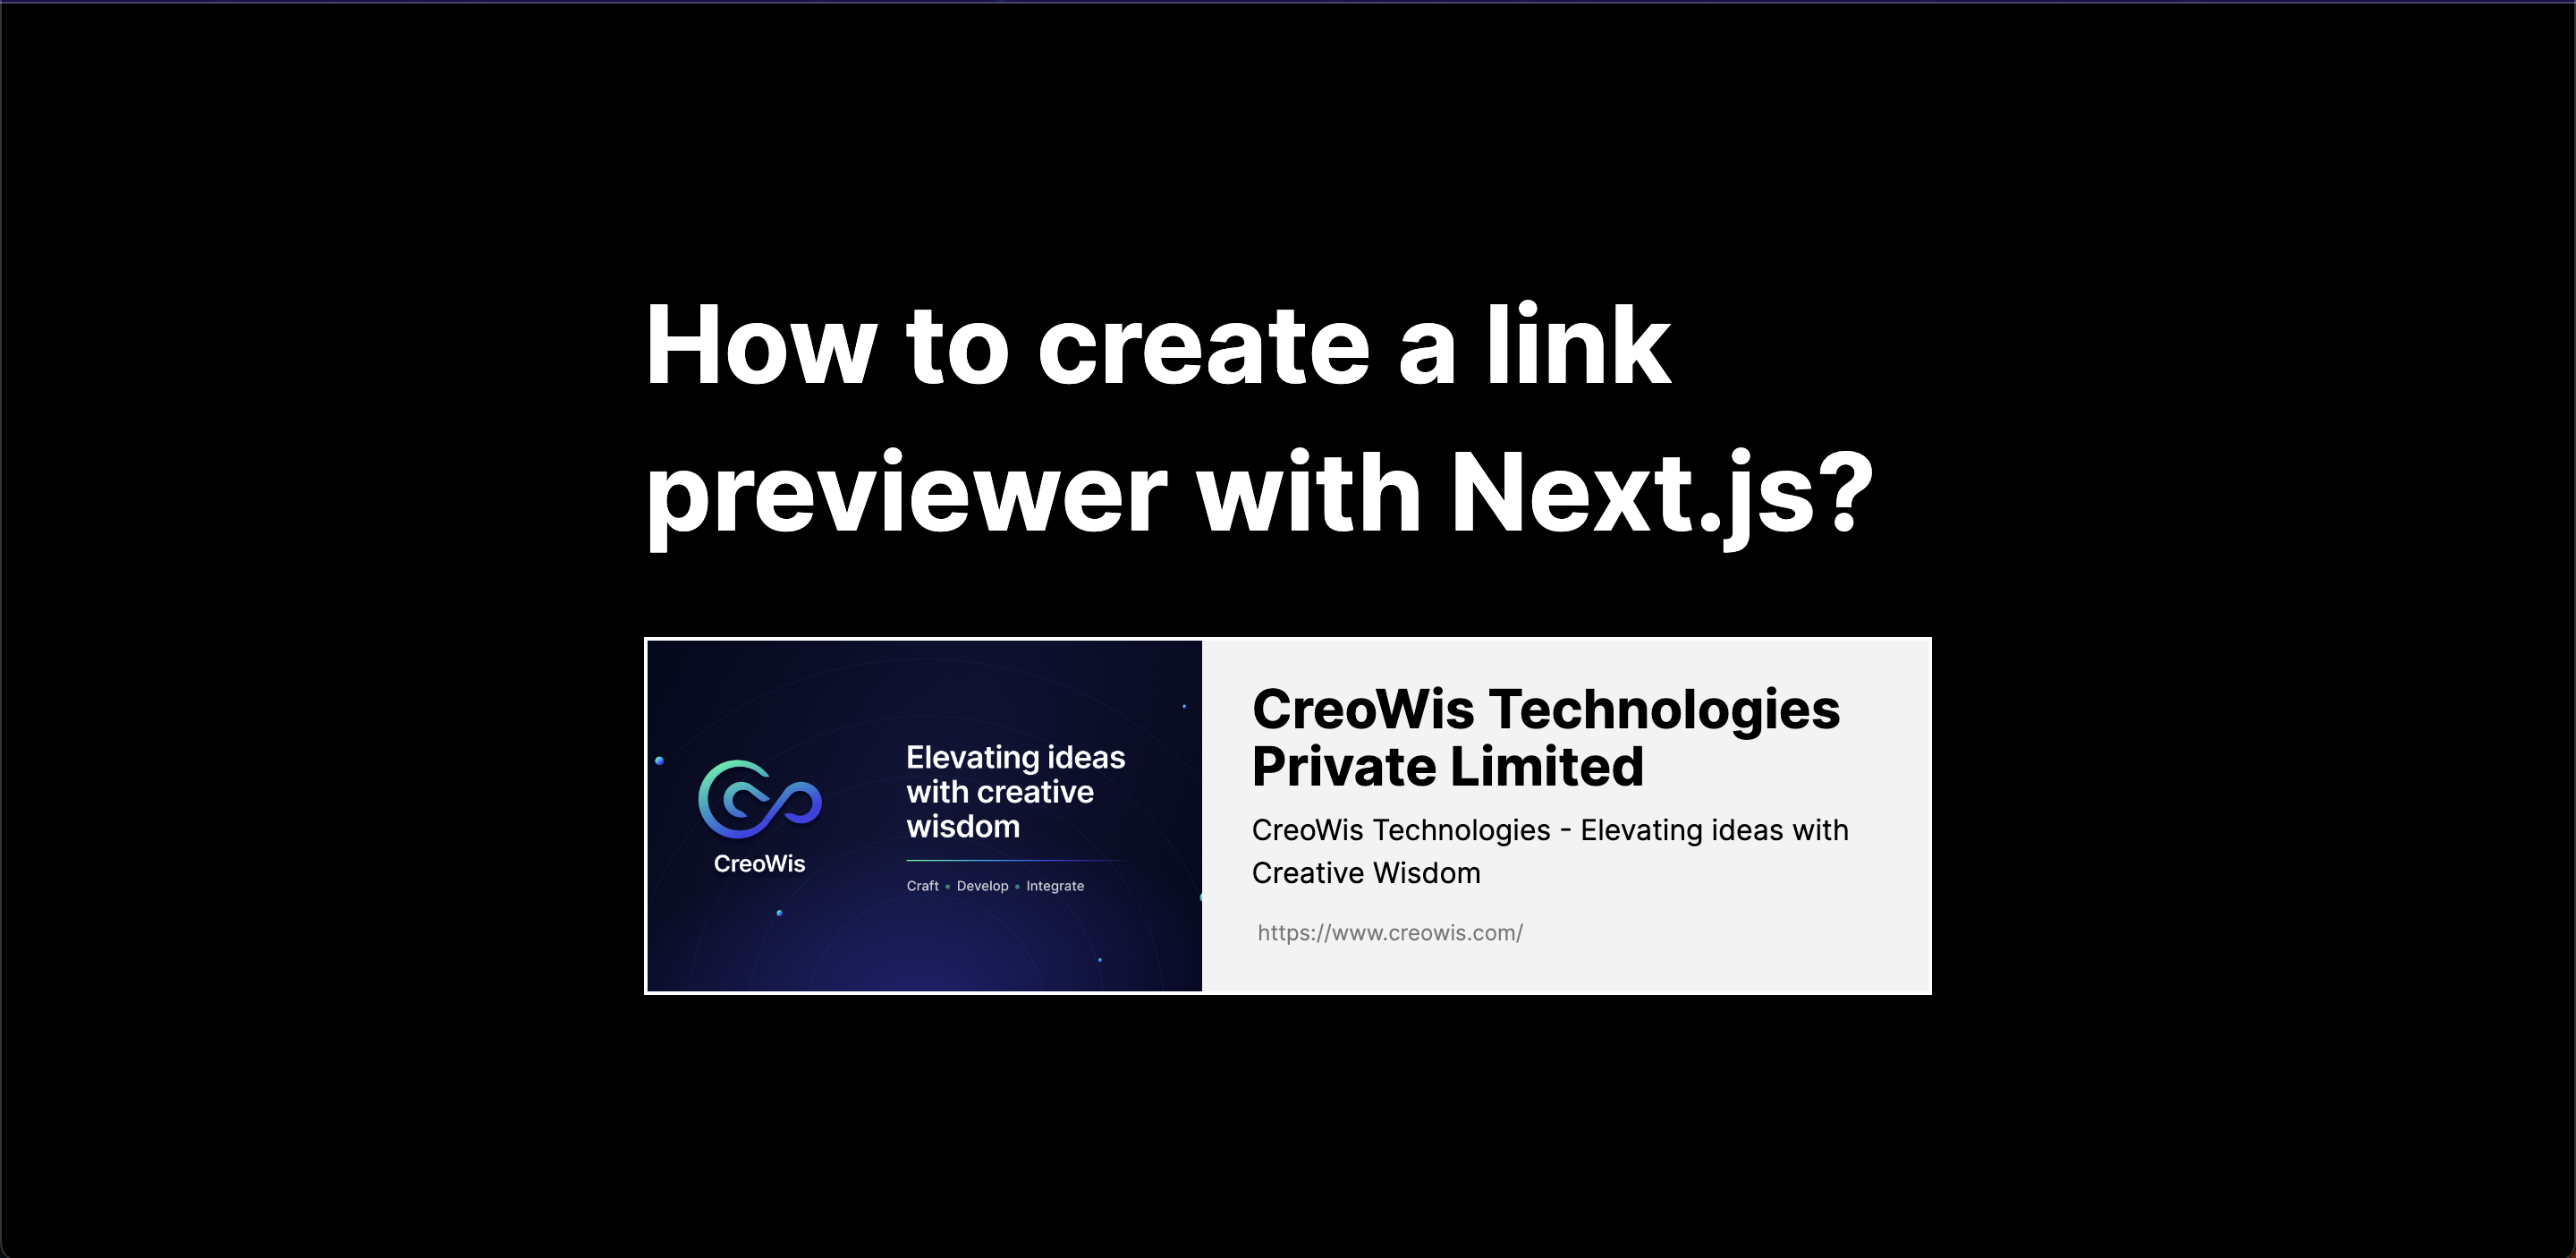 How to create a link previewer with Next.js?